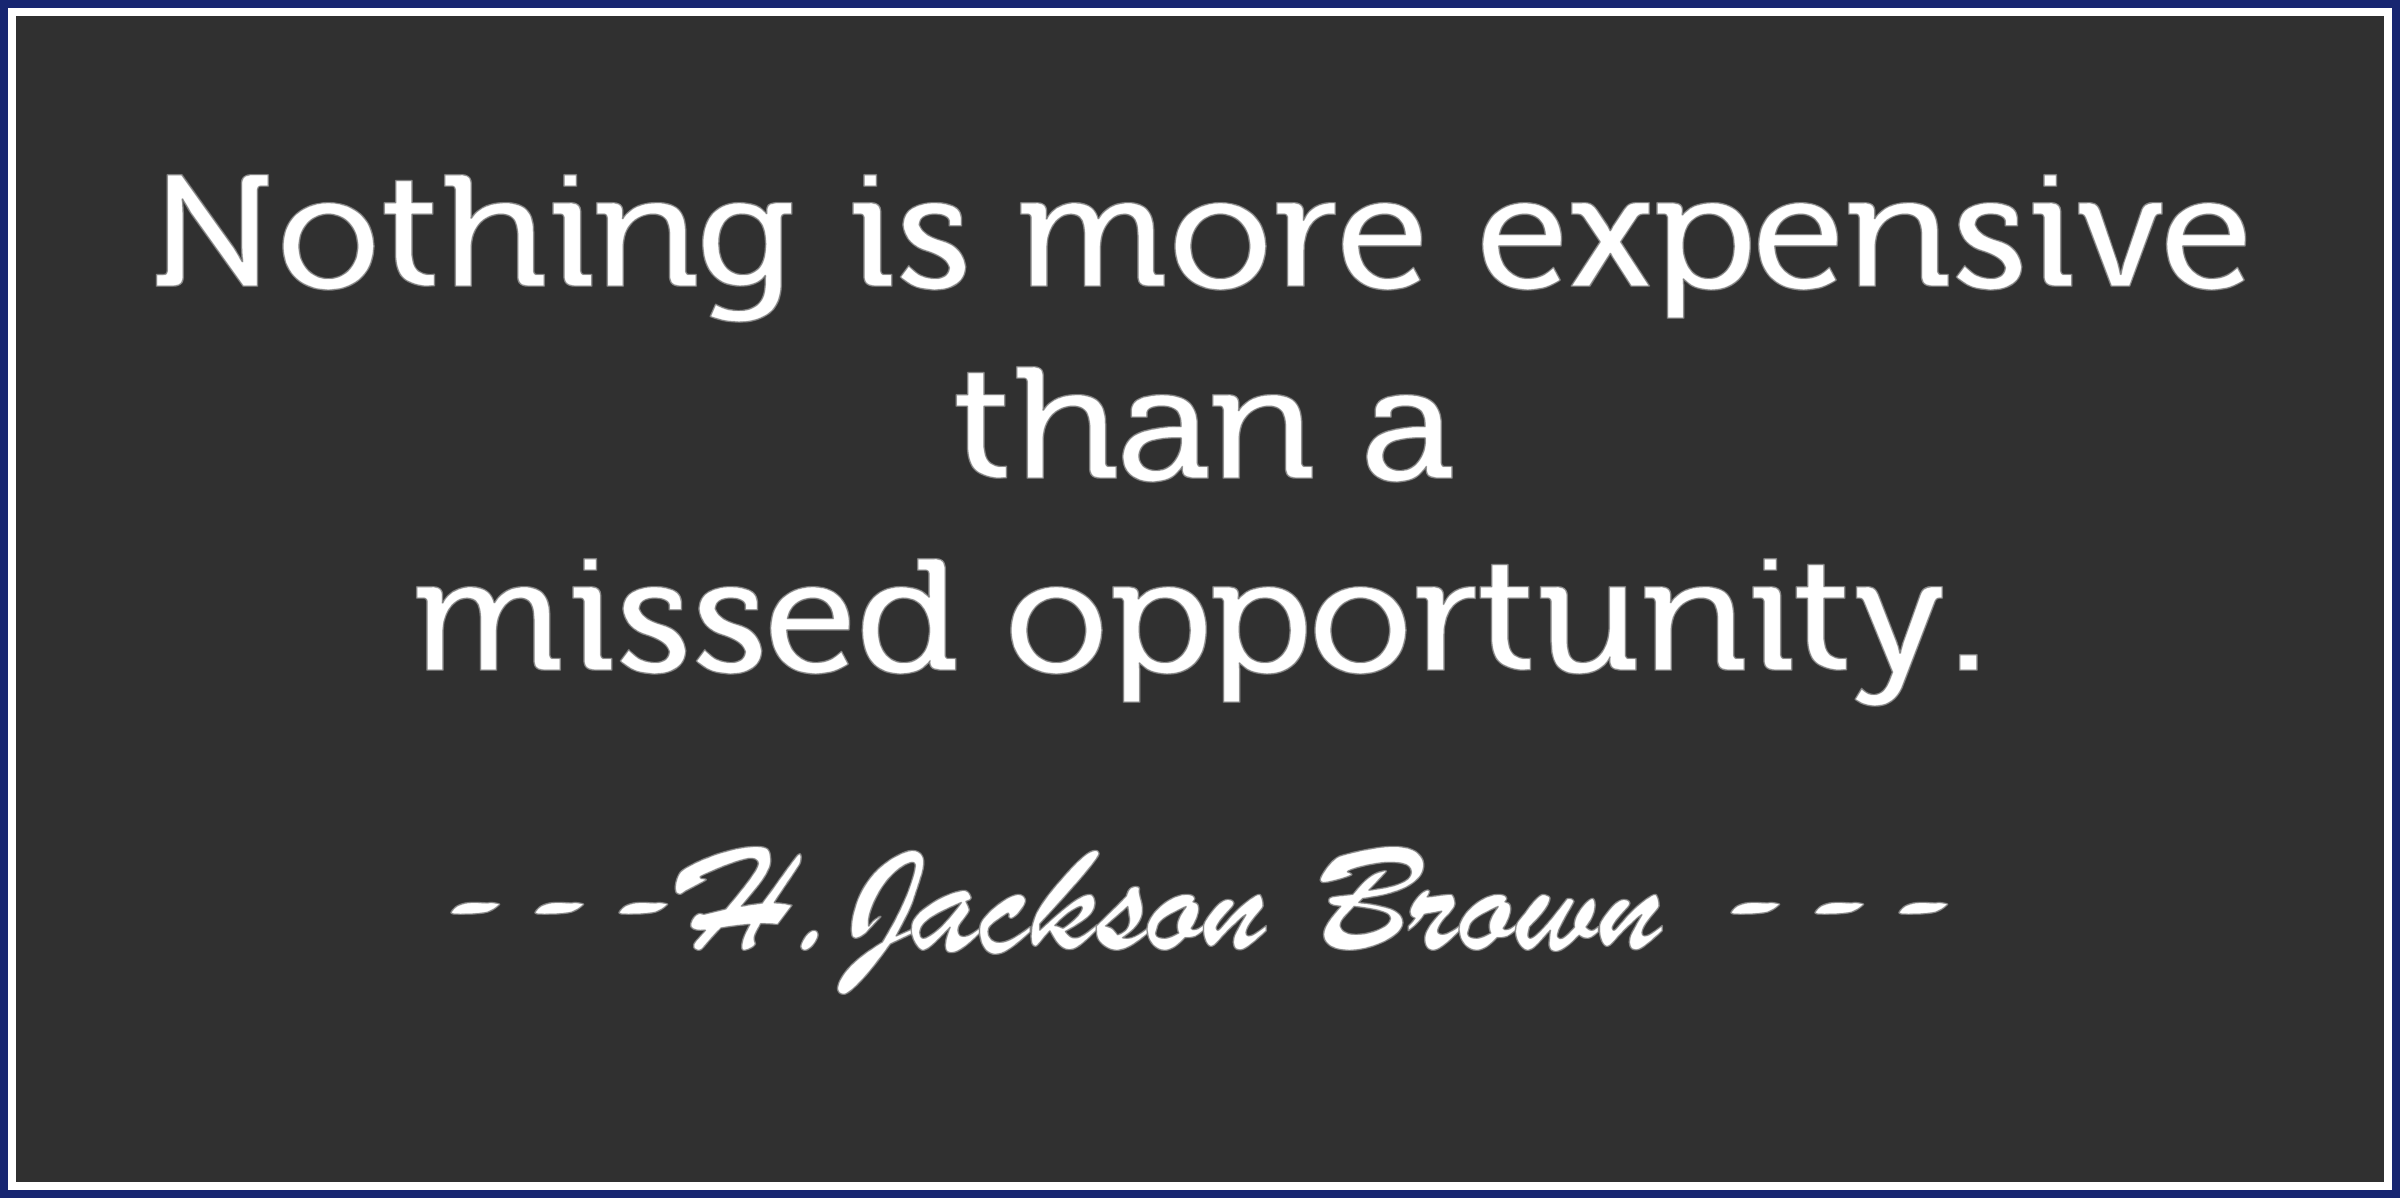 Nothing is more expensive than a missed opportunity